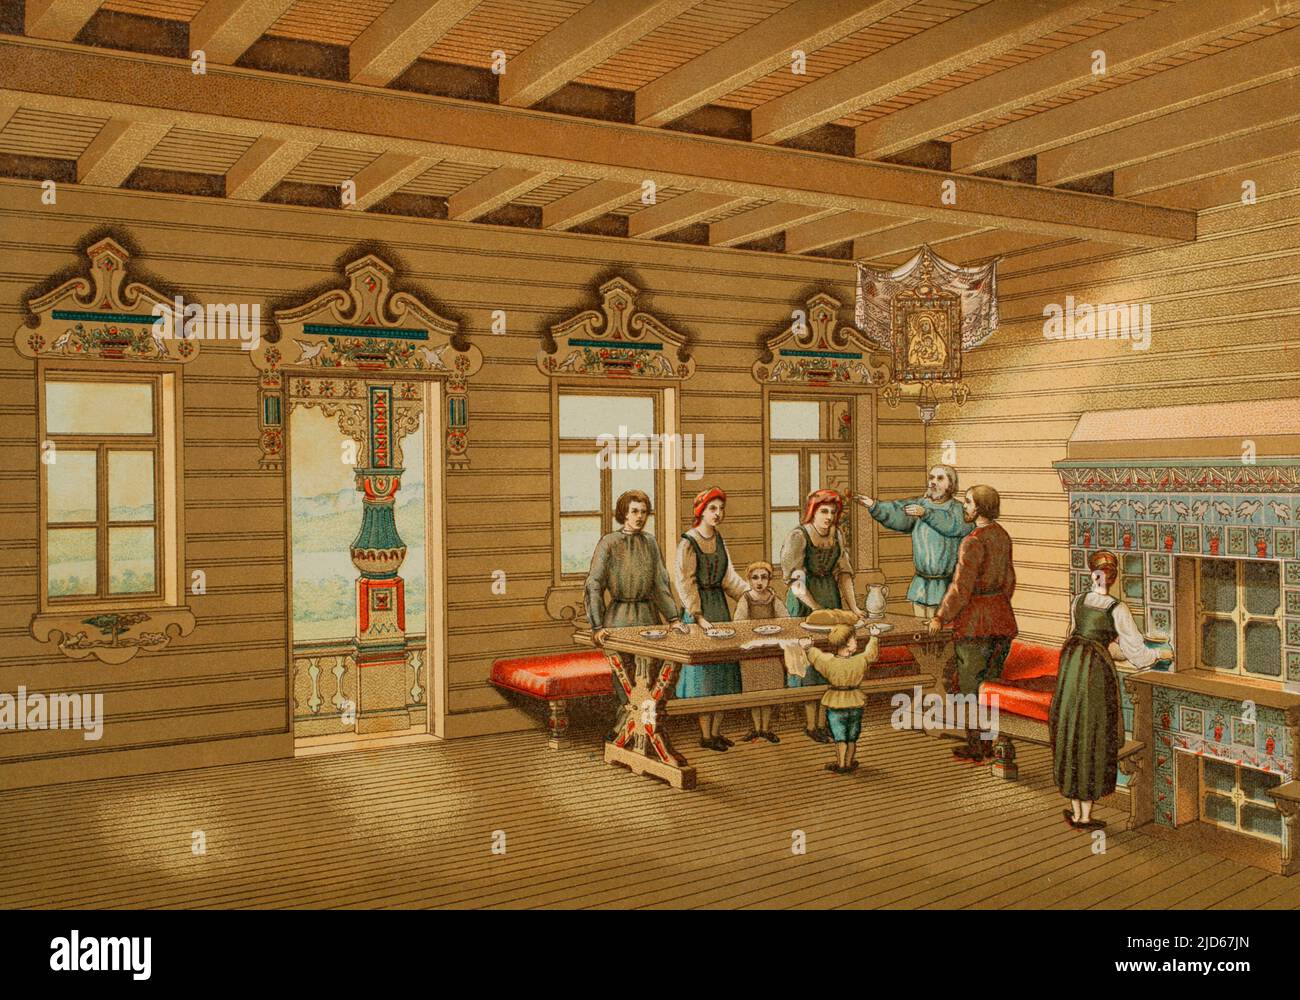 Izba. Traditional Russian peasant dwelling, built of wood. Interior of an izba. Chromolithography. 'Historia Universal' (Universal History), by César Cantú. Volume VII. Published in Barcelona, 1886. Stock Photo